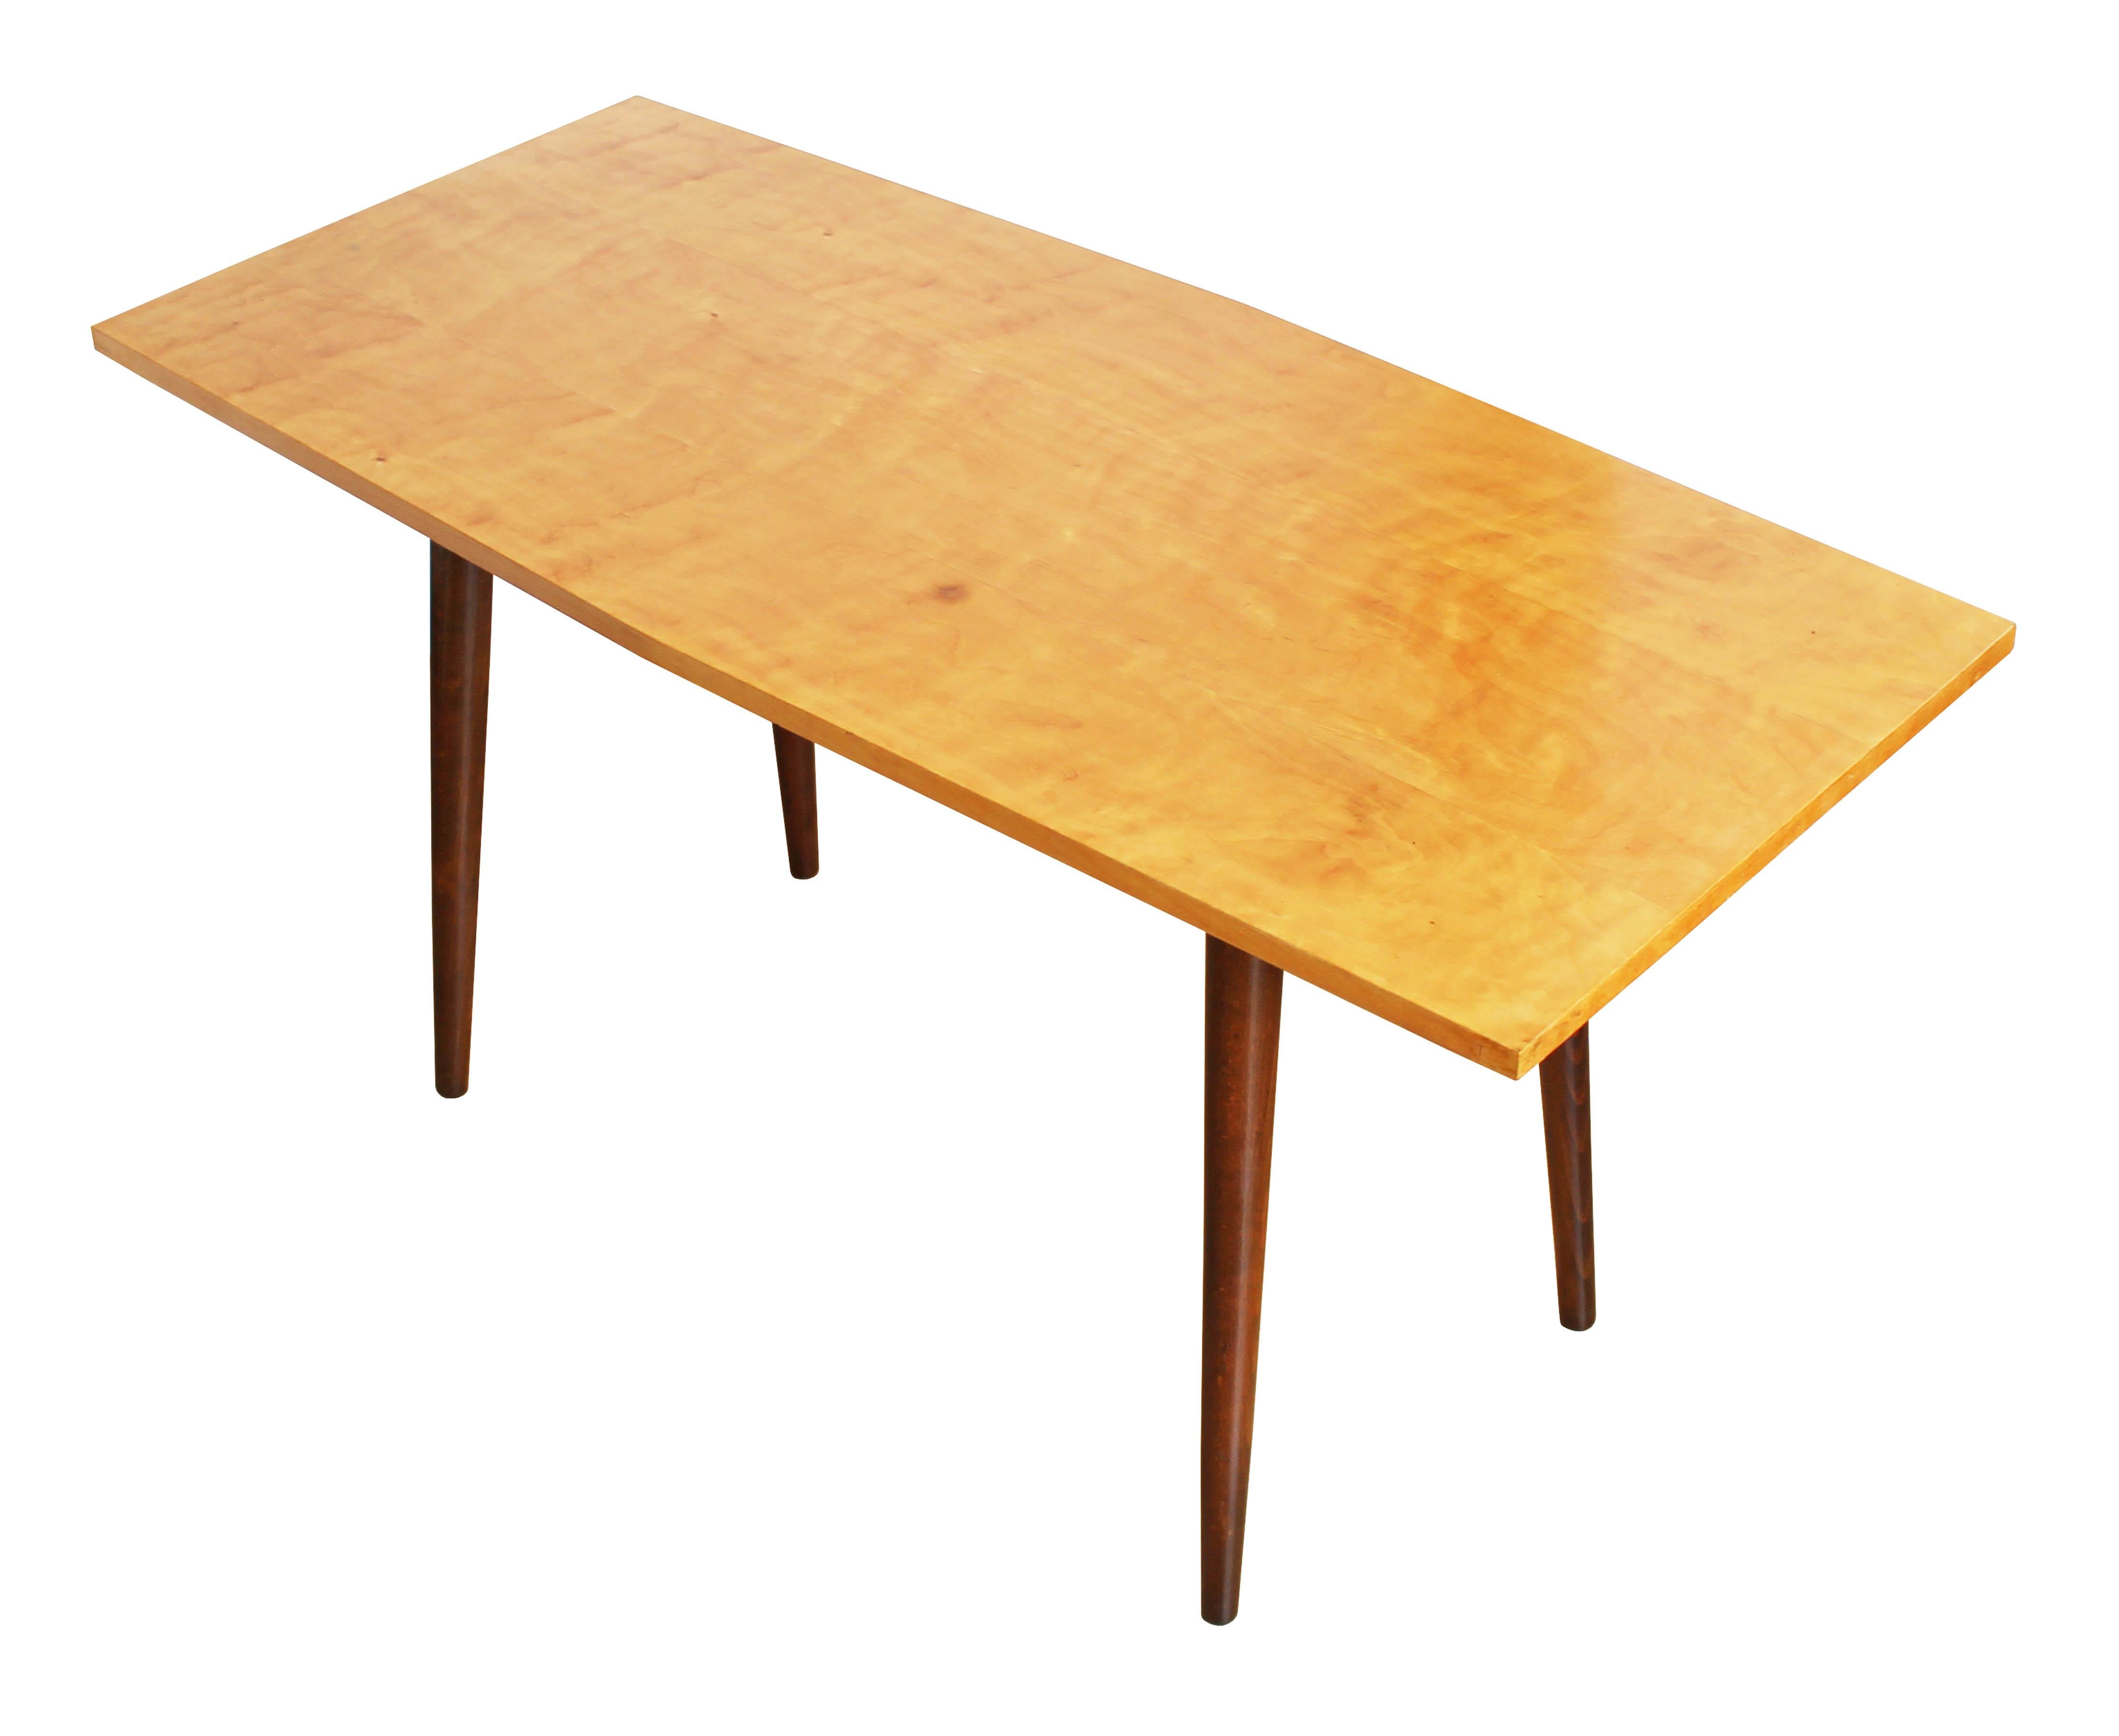 An original coffee table in excellent condition which was produced by UP Zavody in 1960s, in former Czechoslovakia.

We are not aware of the designer but we know that this piece was designed in the so-called Czech Brussel style with a visible